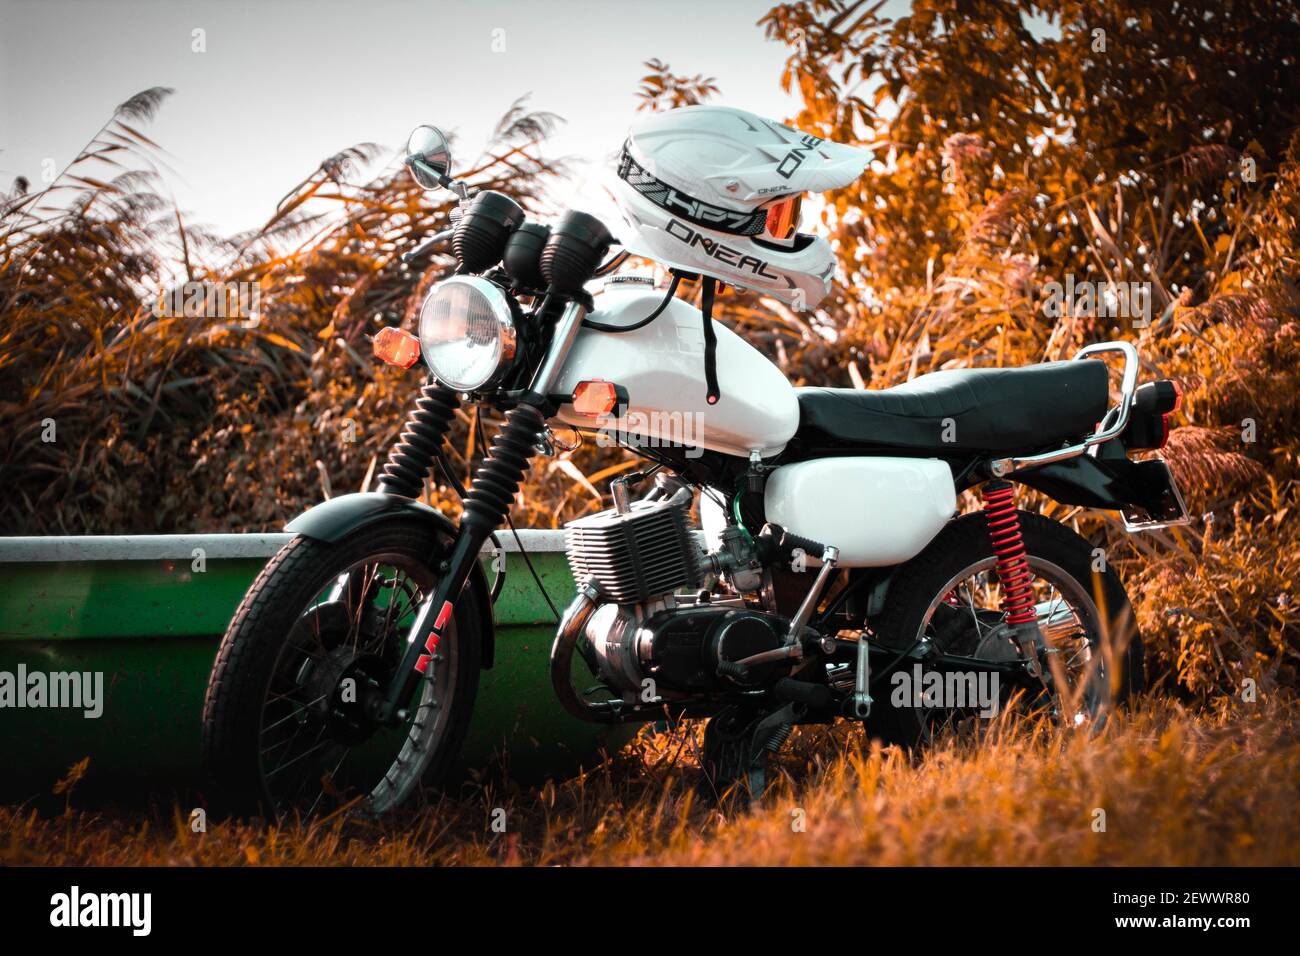 MALCHOW (MüRITZ), GERMANY - Jun 12, 2019: A white motorcycle (MZ ETZ 150ccm); Retro motorbike; with high contrast against the backround; staying at th Stock Photo